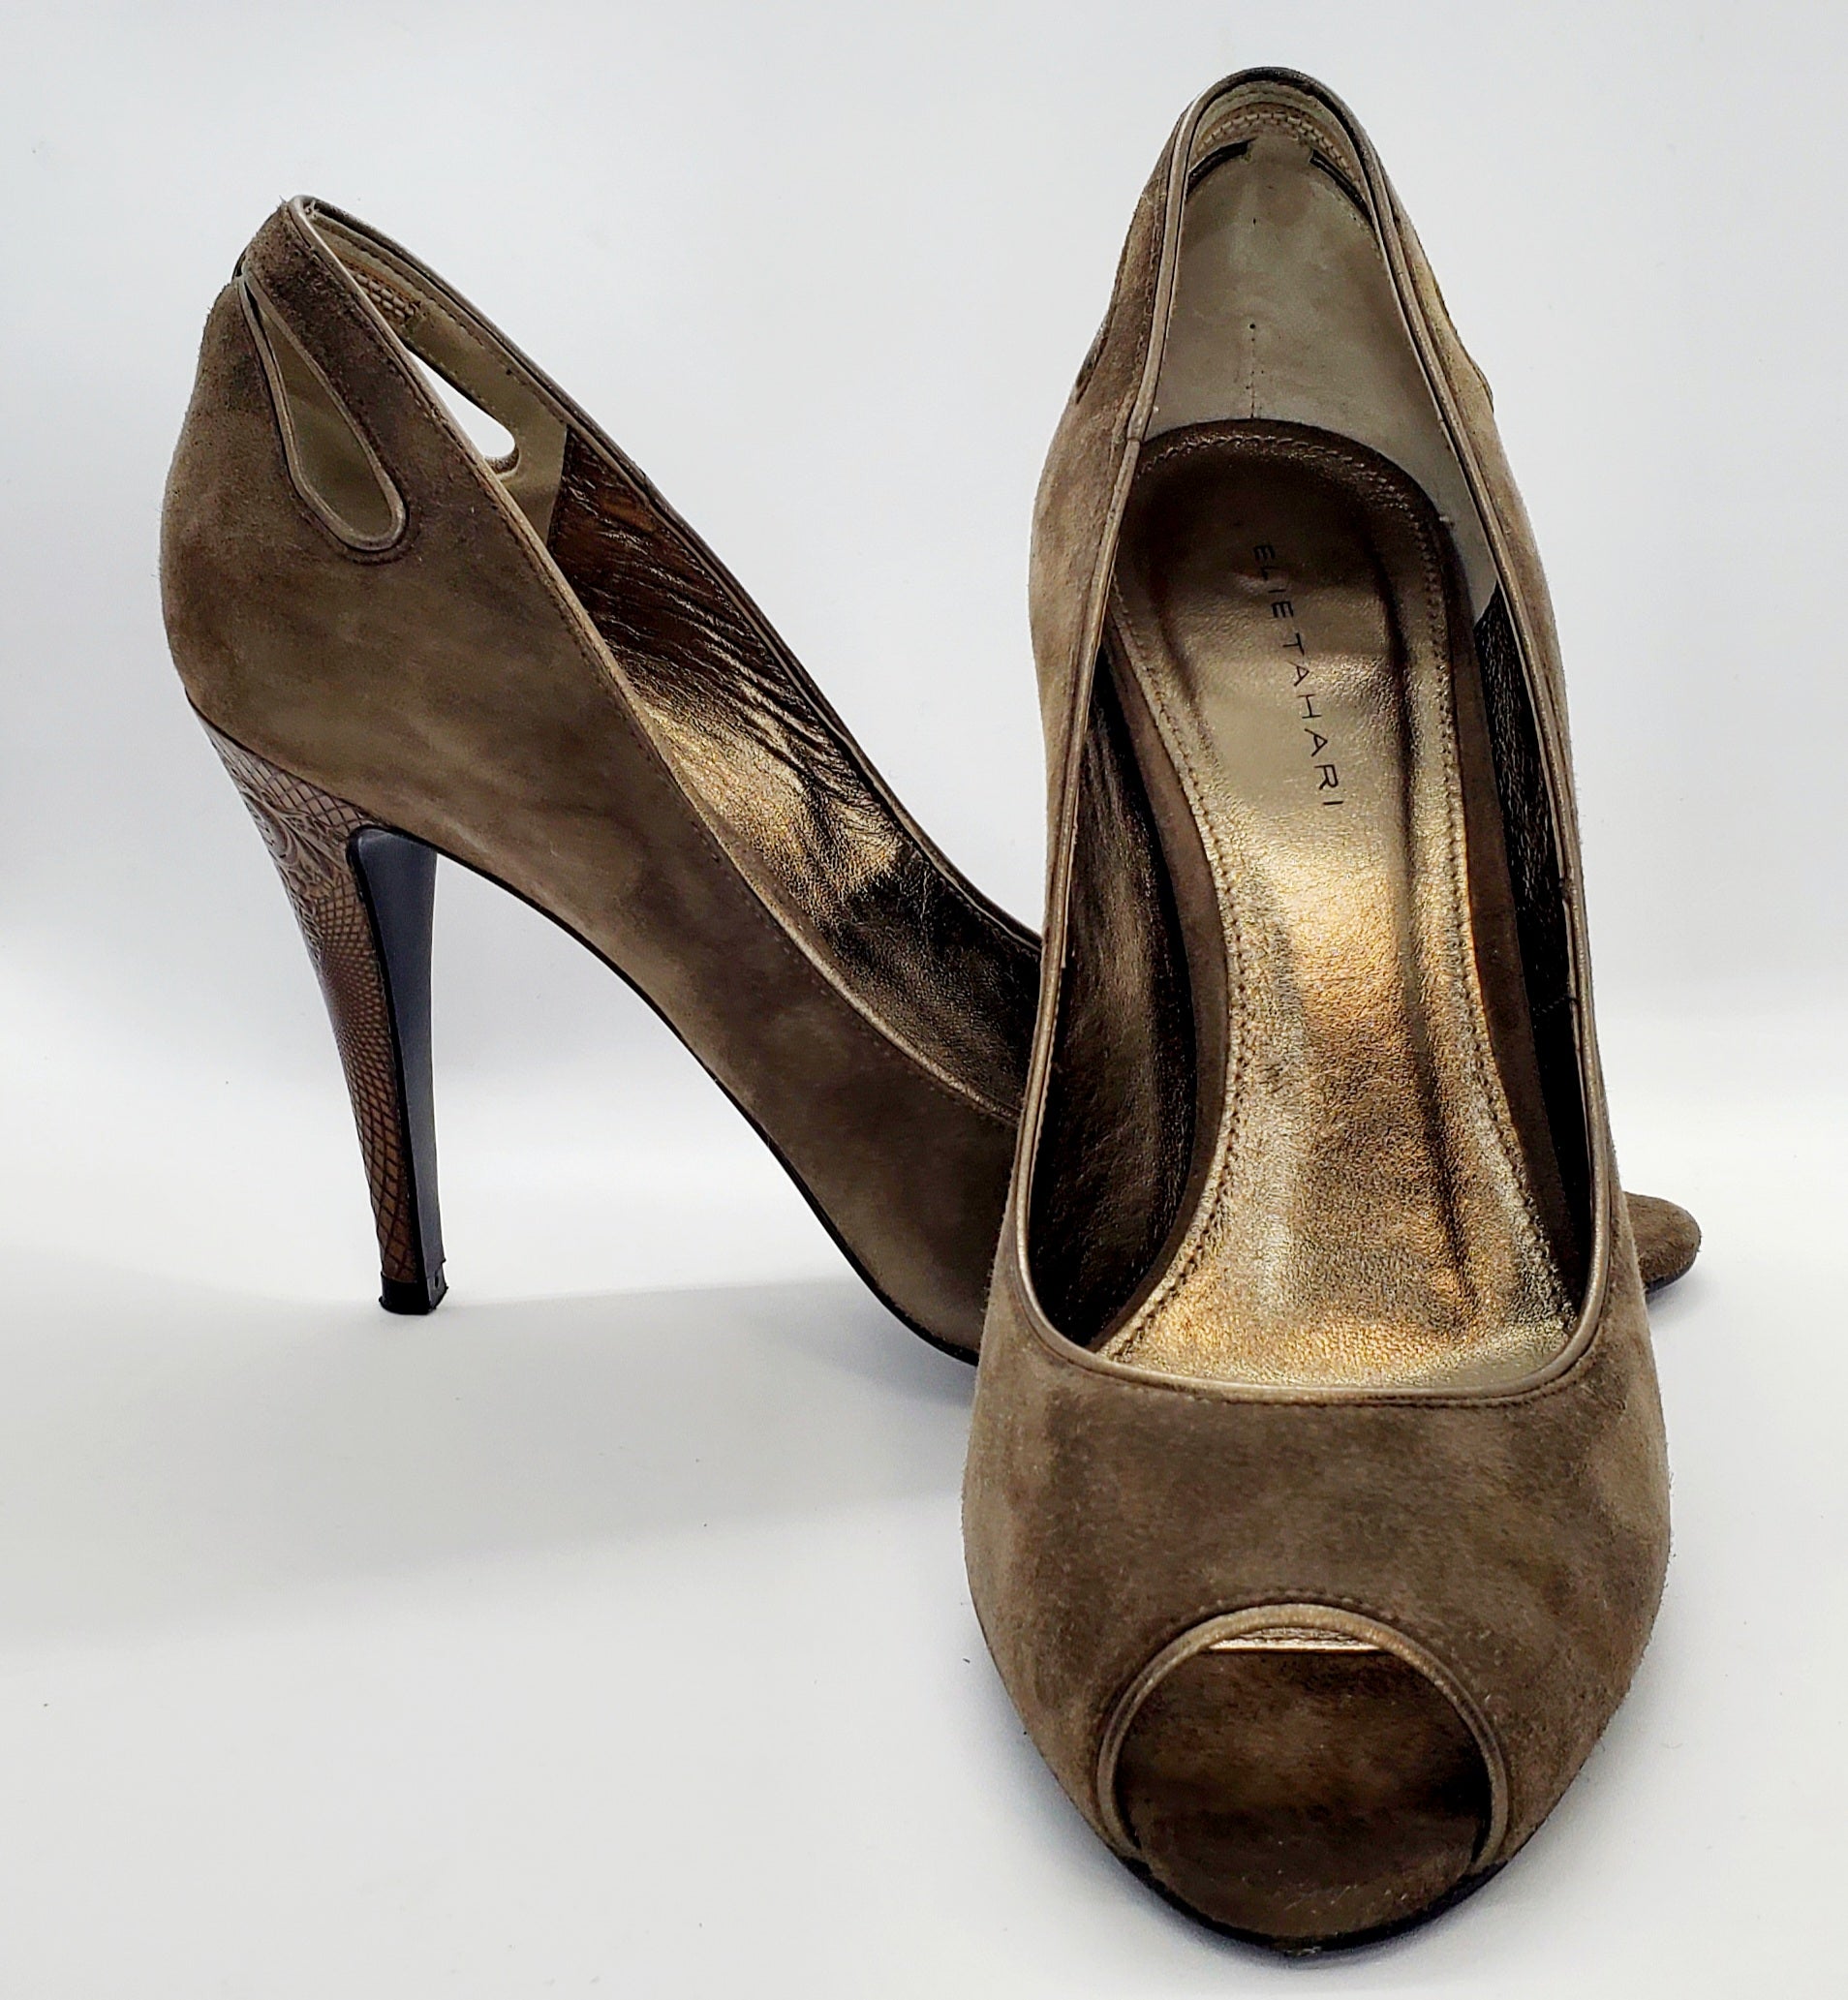 Front and Side view of Elie Tahari Suede open toe pump with ornate patterned keyhole heels